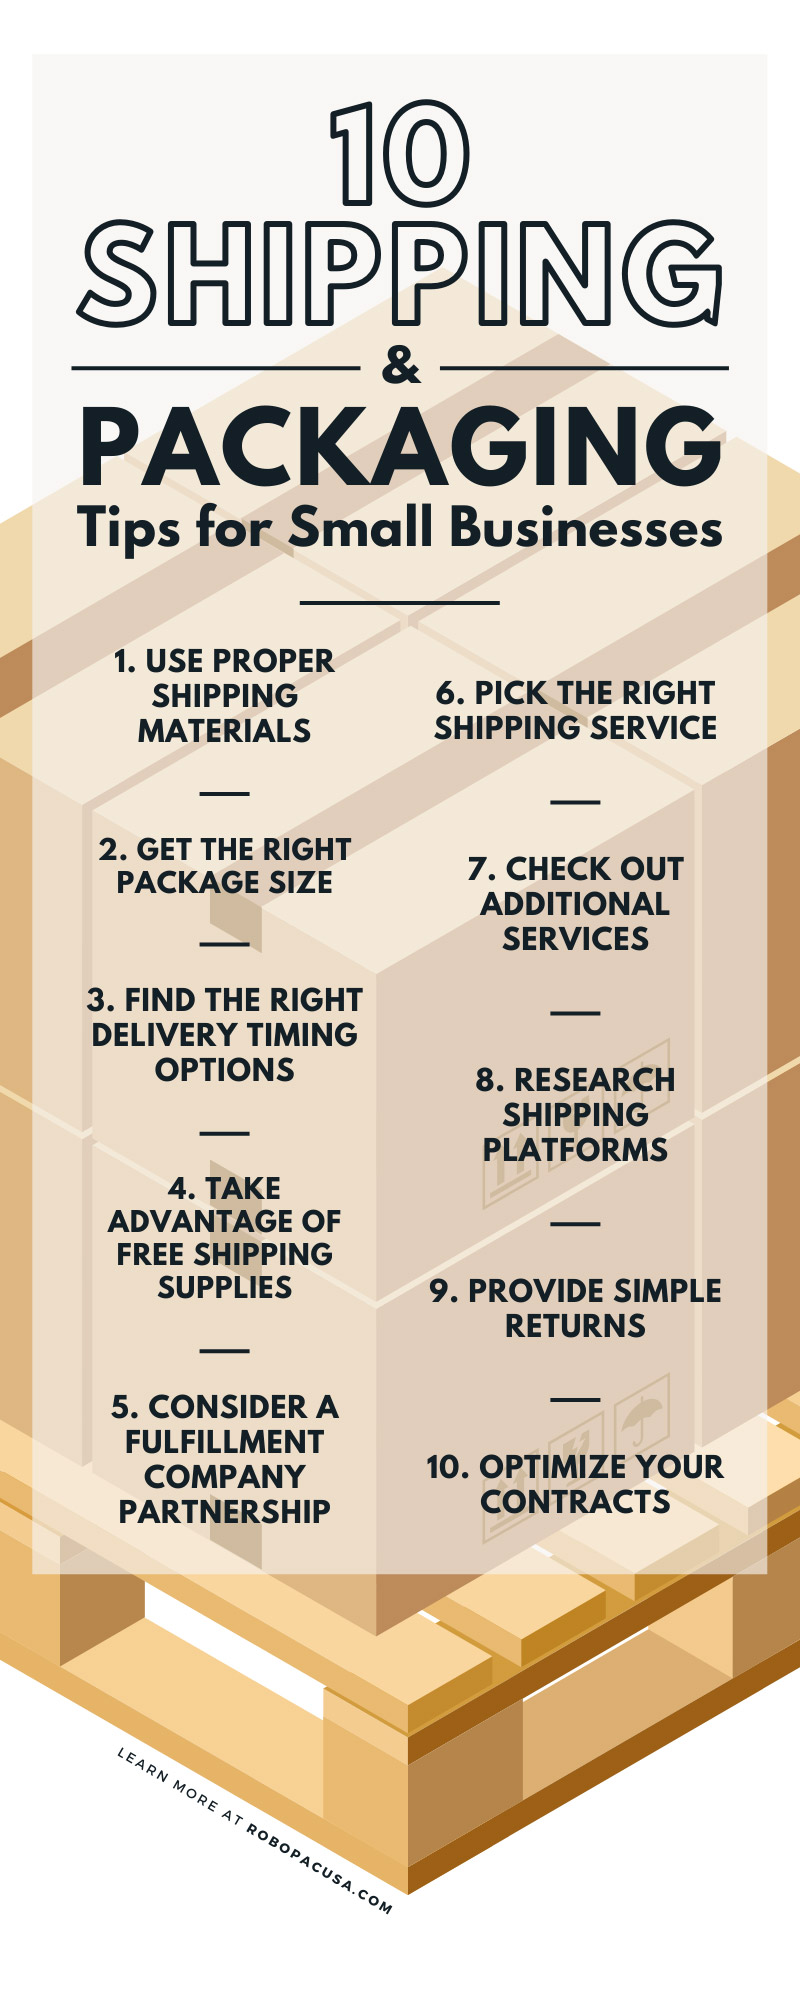 10 Shipping & Packaging Tips for Small Businesses